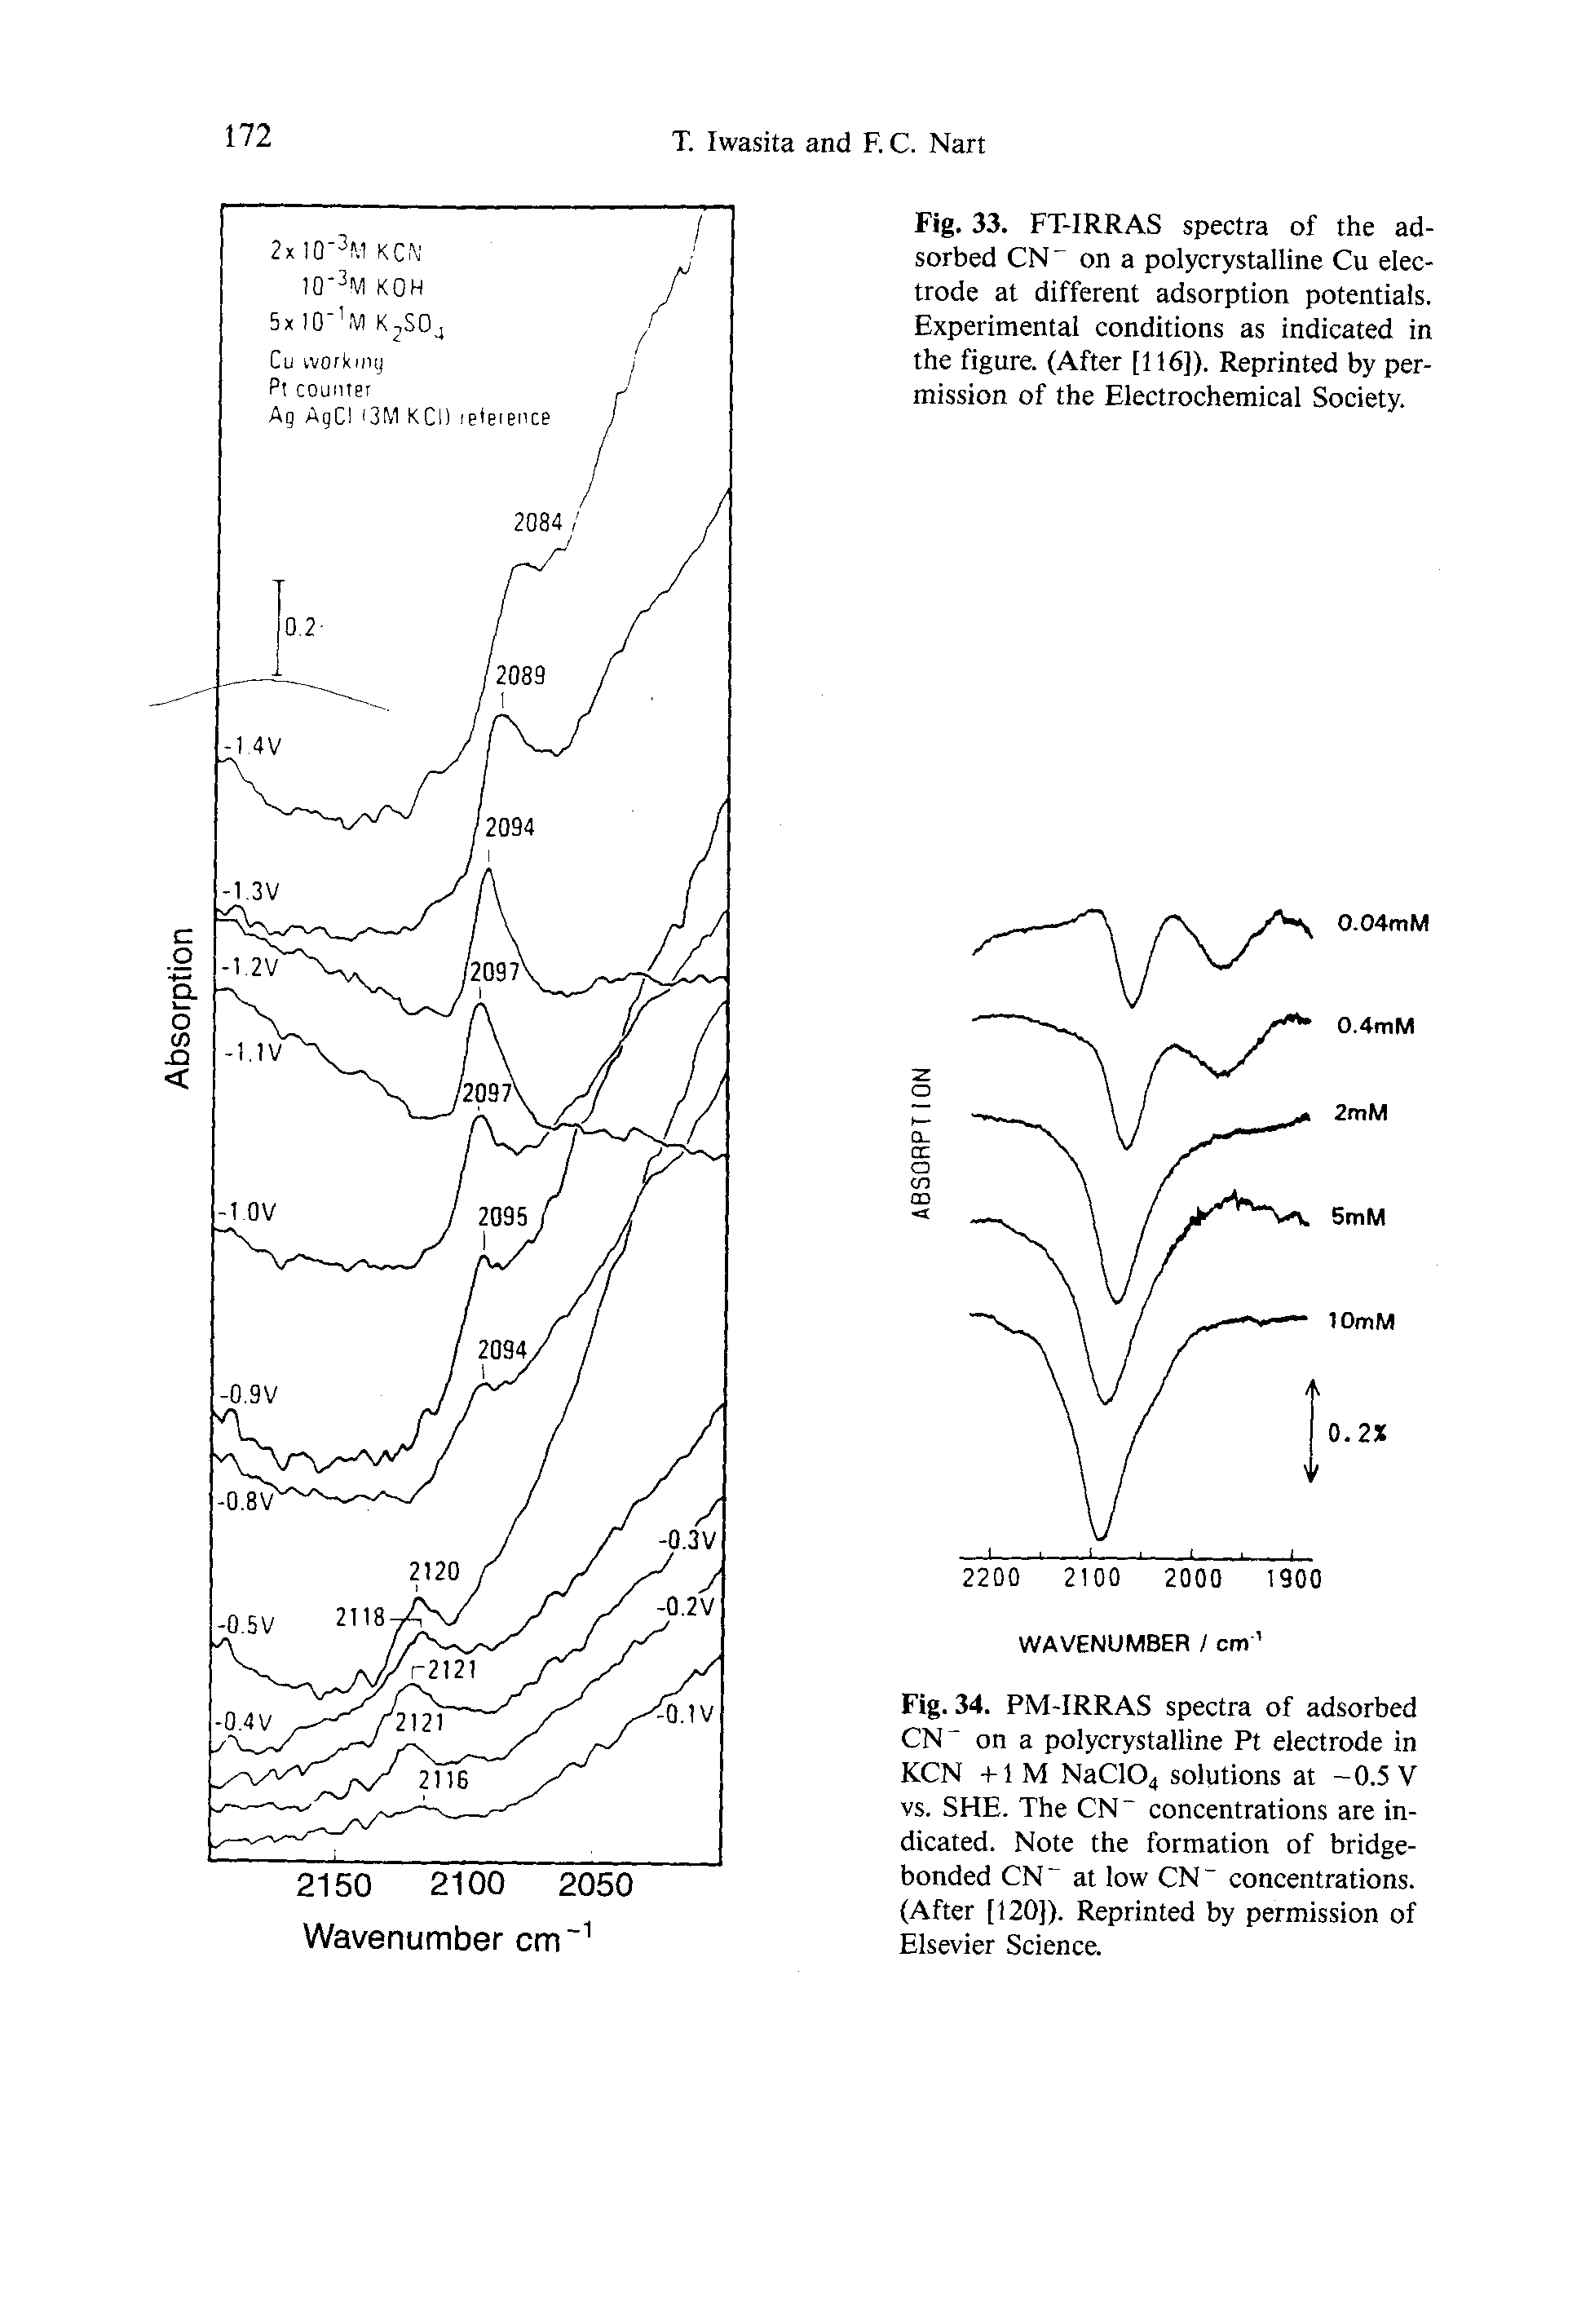 Fig. 34. PM-IRRAS spectra of adsorbed CN on a polycrystalline Pt electrode in KCN +1 M NaClO solutions at -0.5 V vs. SHE. The CN concentrations are indicated. Note the formation of bridge-bonded CN at low CN concentrations. (After [120]). Reprinted by permission of Elsevier Science.